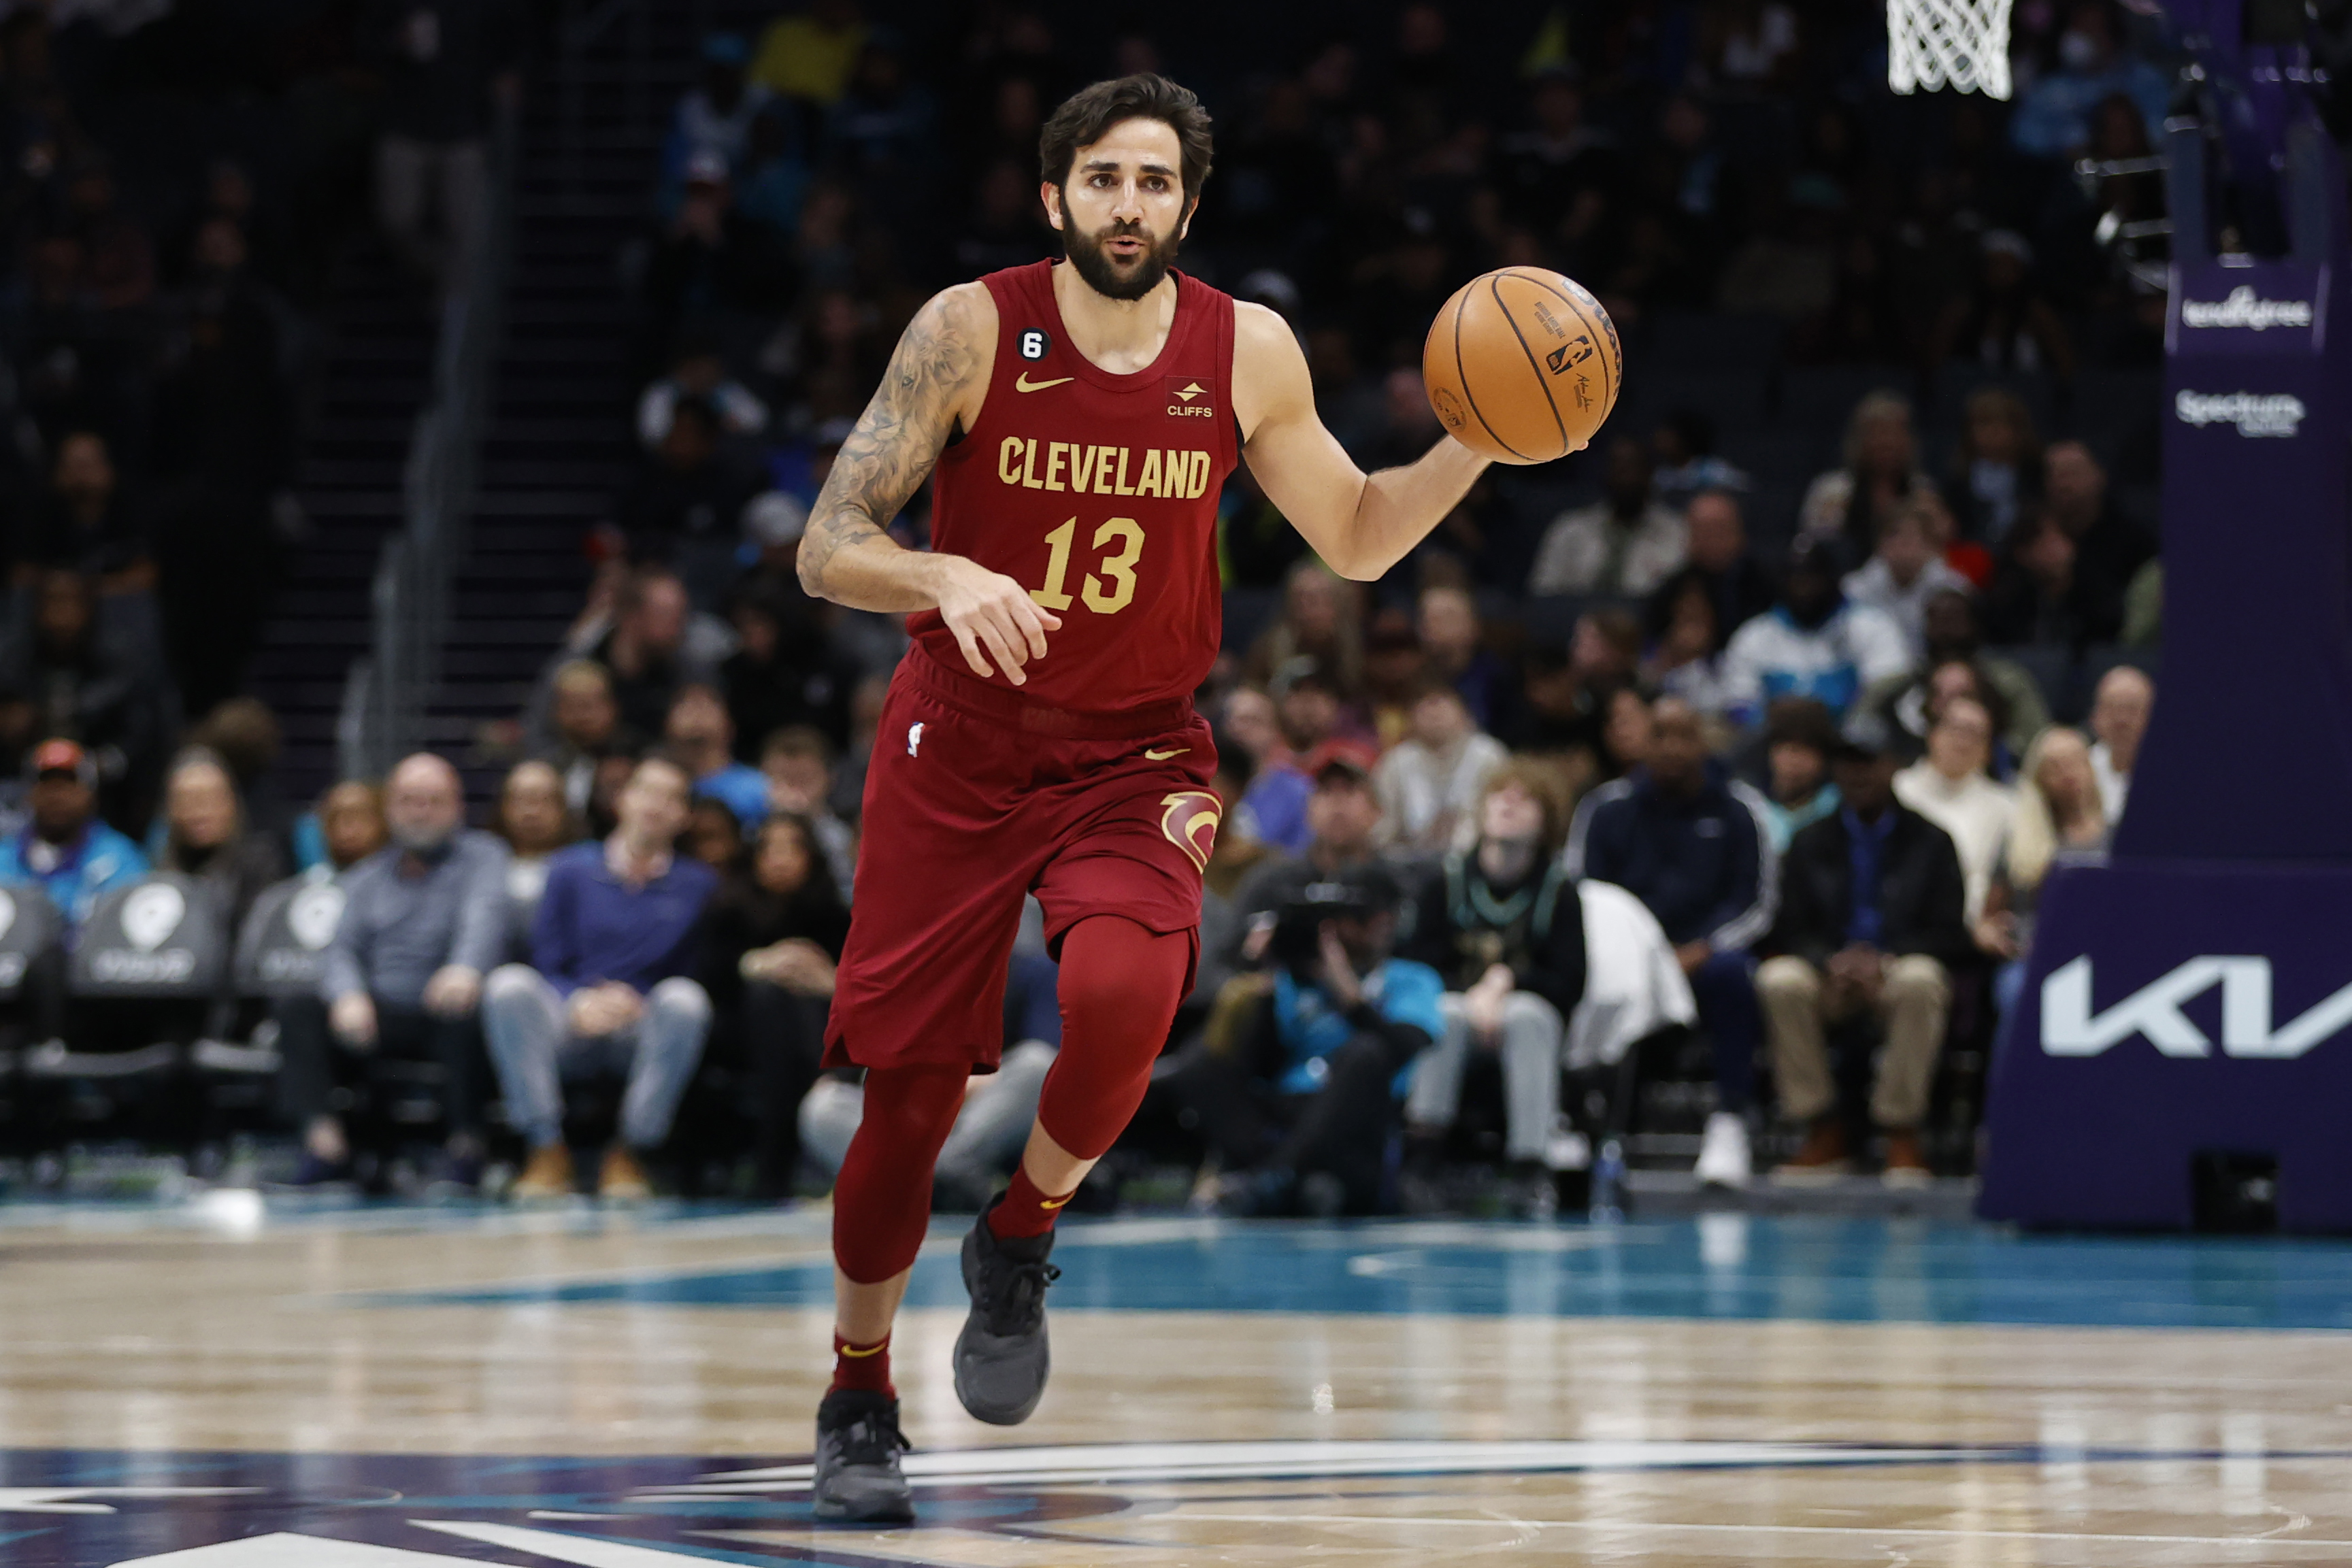 Mar 12, 2023; Charlotte, North Carolina, USA; Cleveland Cavaliers guard Ricky Rubio (13) brings the ball up the court during the first half against the Charlotte Hornets at Spectrum Center.